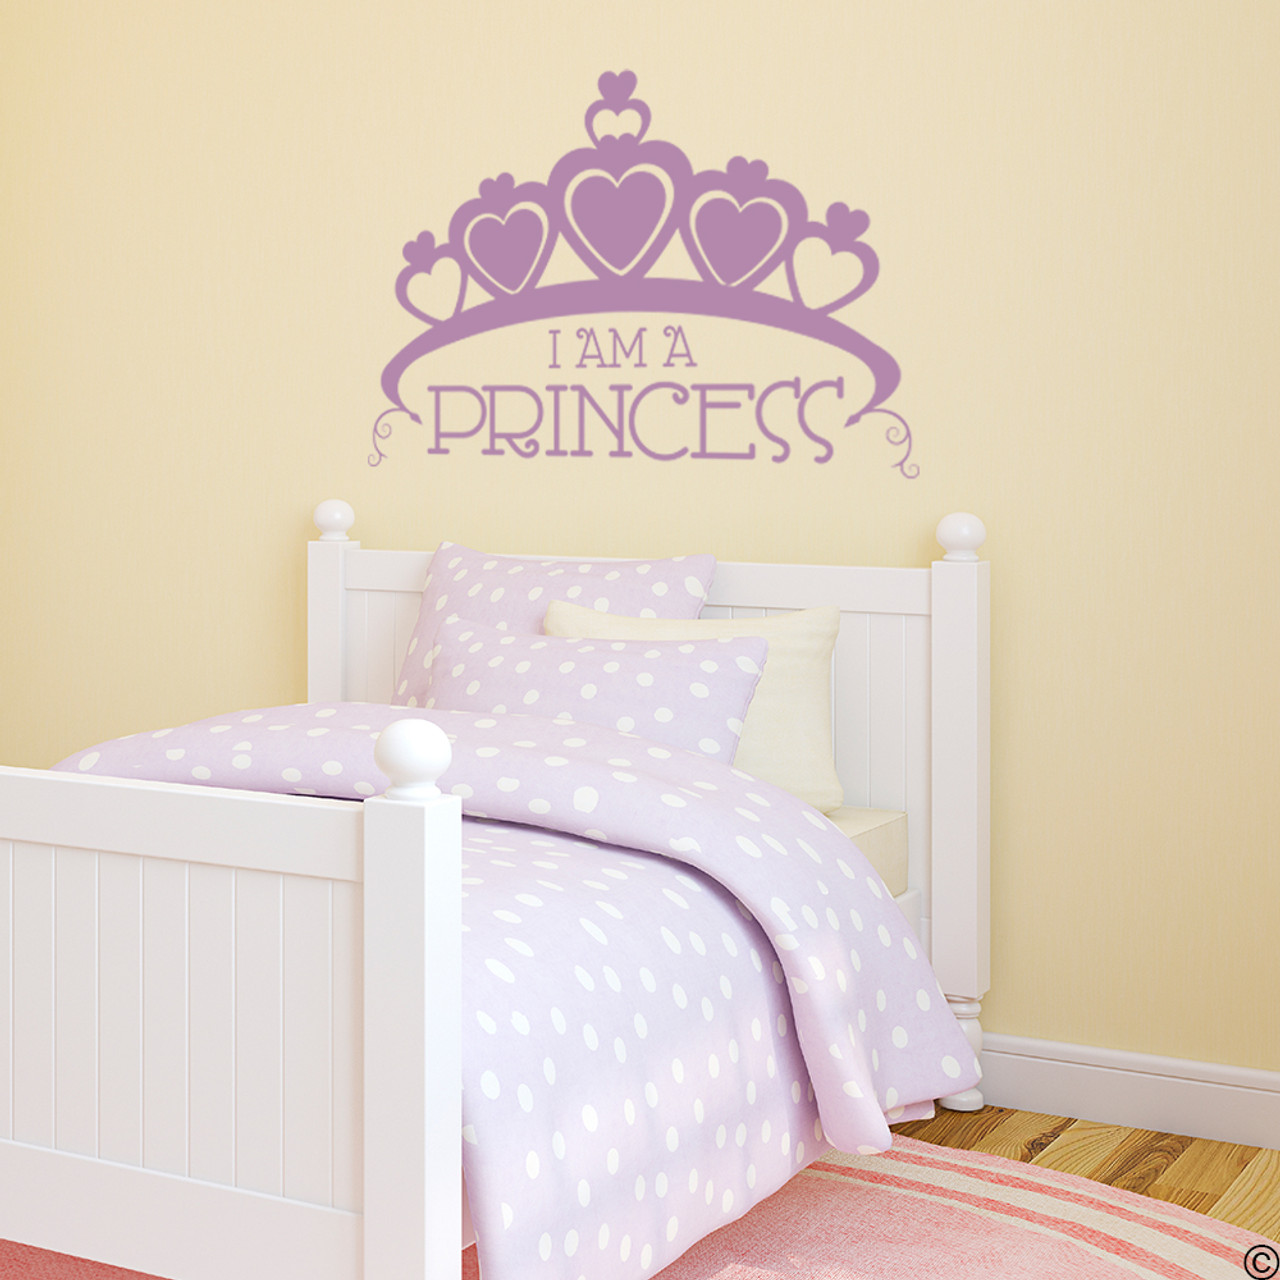 Princess Crown with the wording "I'm A Princess," vinyl wall decal in lavender